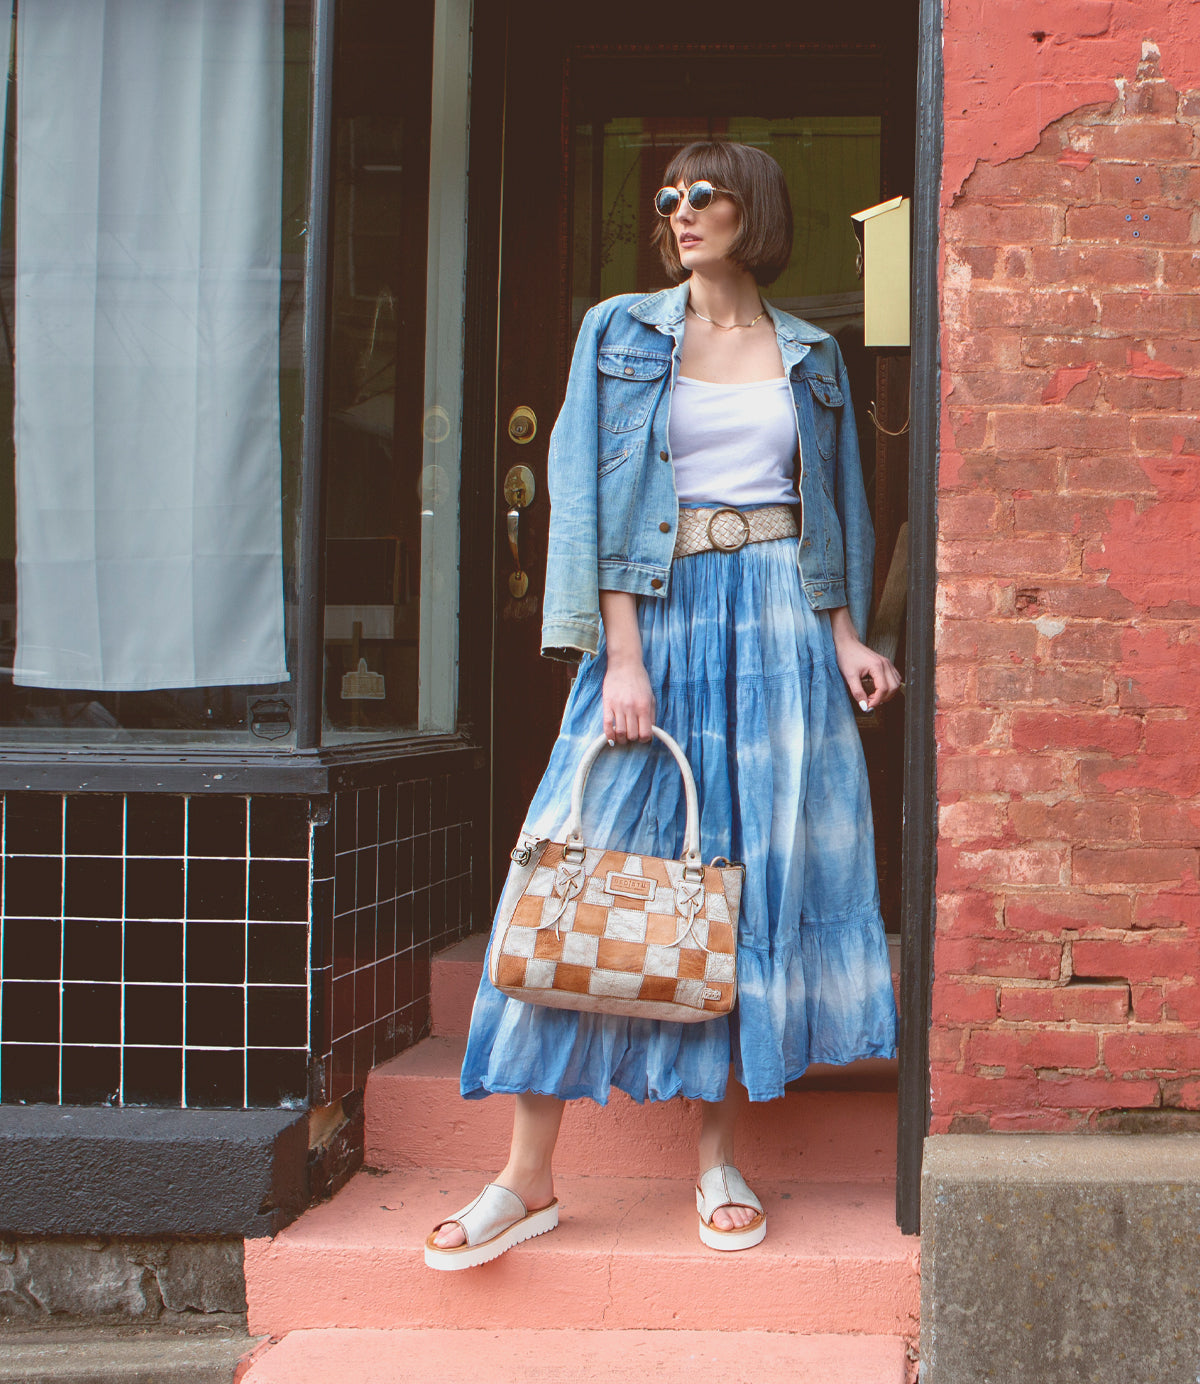 A woman wearing a Rockababy SL leather skirt and Bed Stu denim jacket, showcasing sustainability and environmentally friendly fashion.